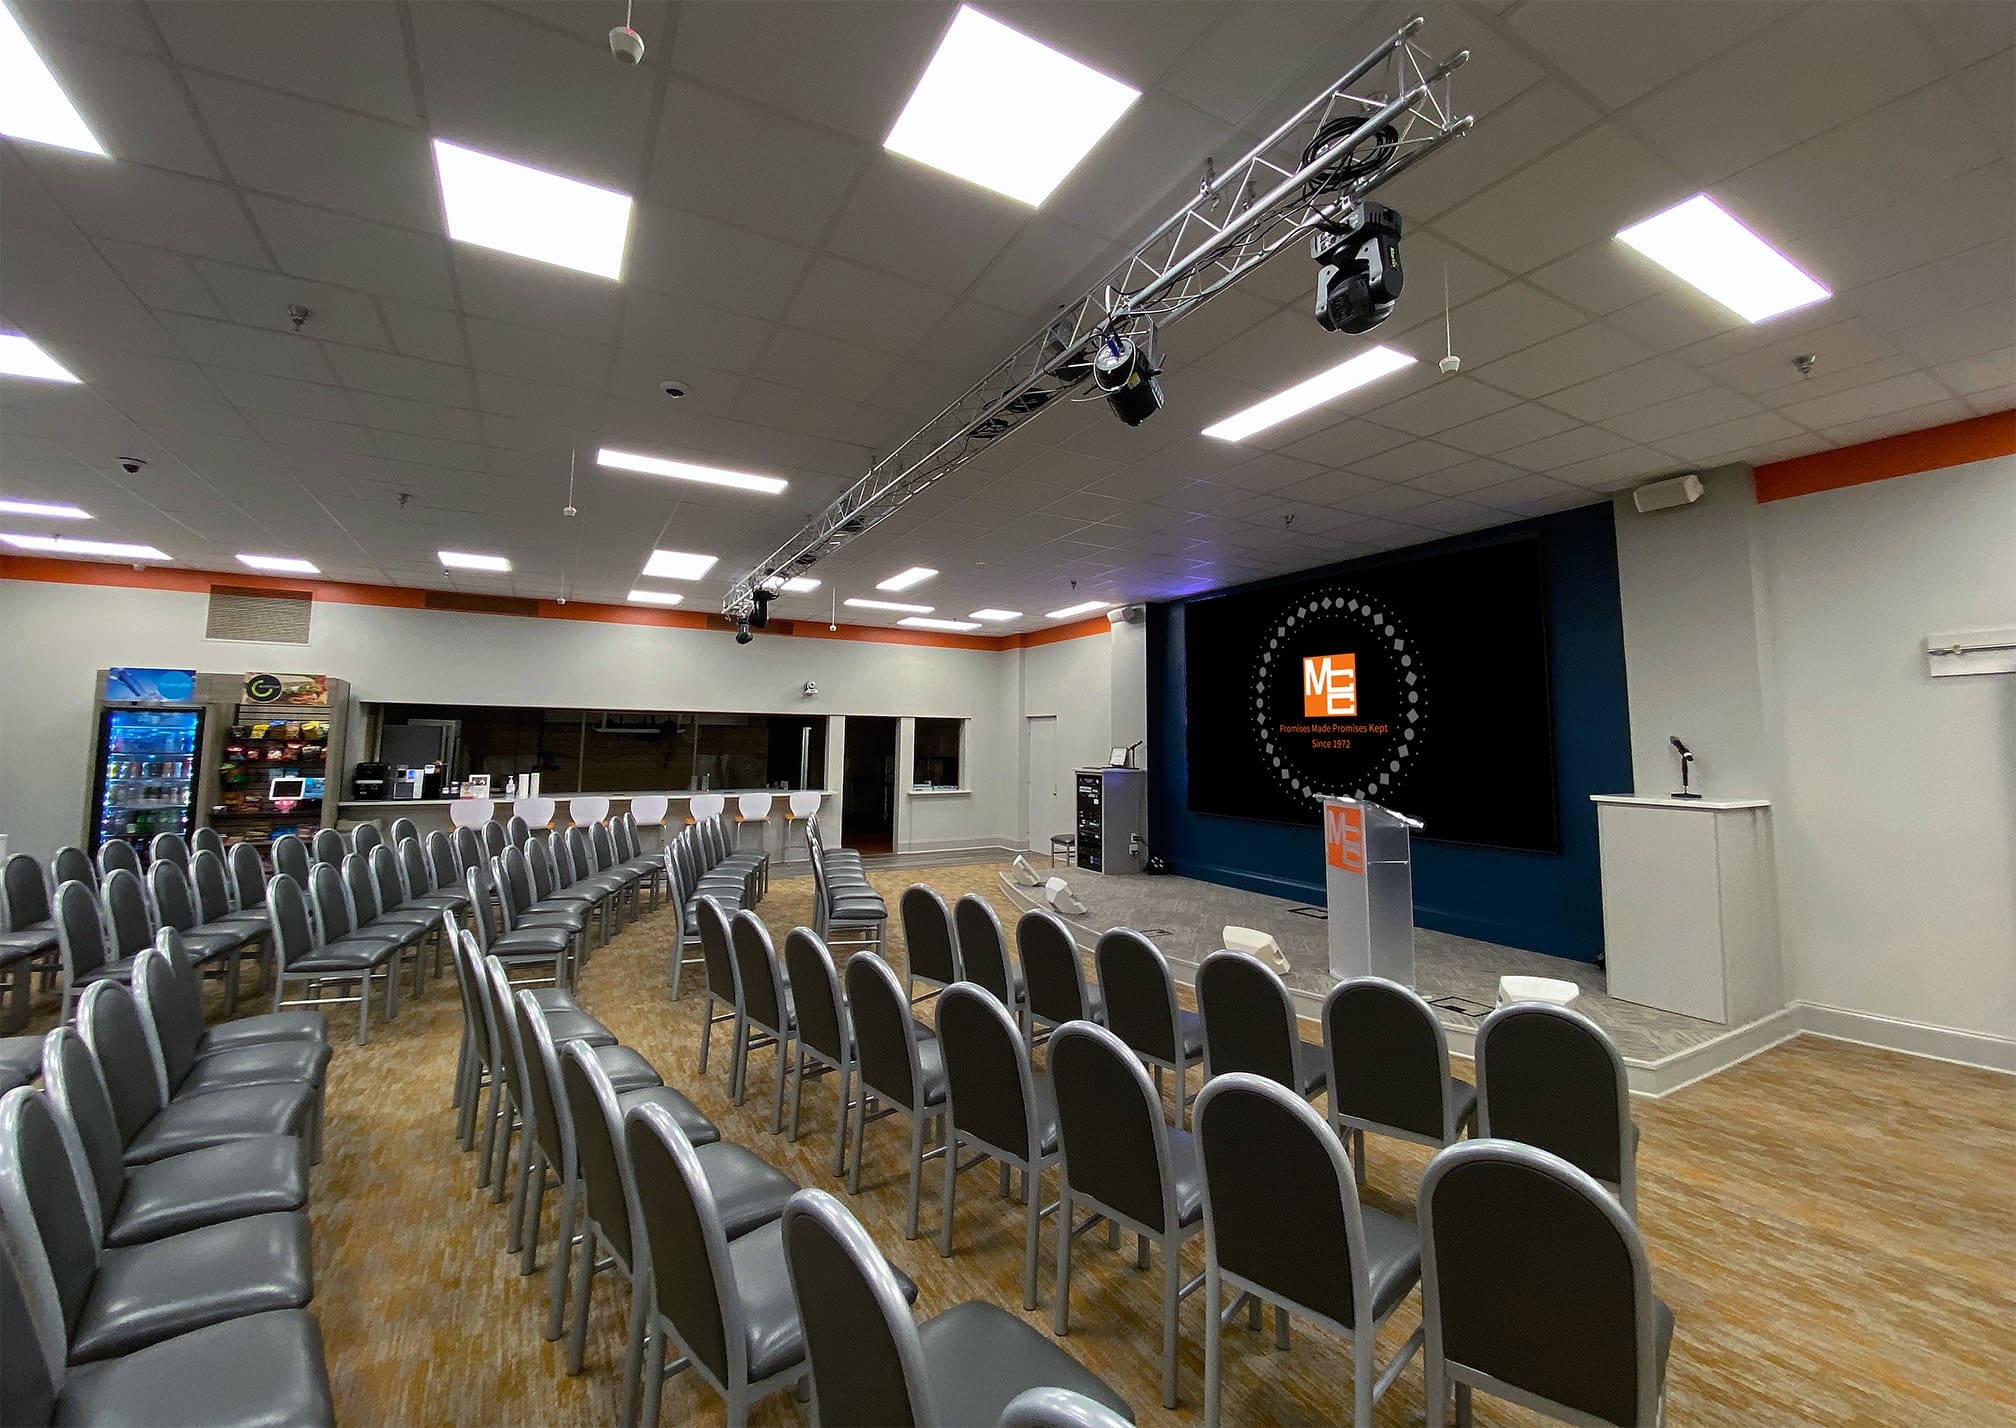 MCC University, the central gathering point at MCC Memphis, features a massive LED wall, digital signage, Webex Room Kit Pro video conferencing and custom lighting and sound systems with smart controls.